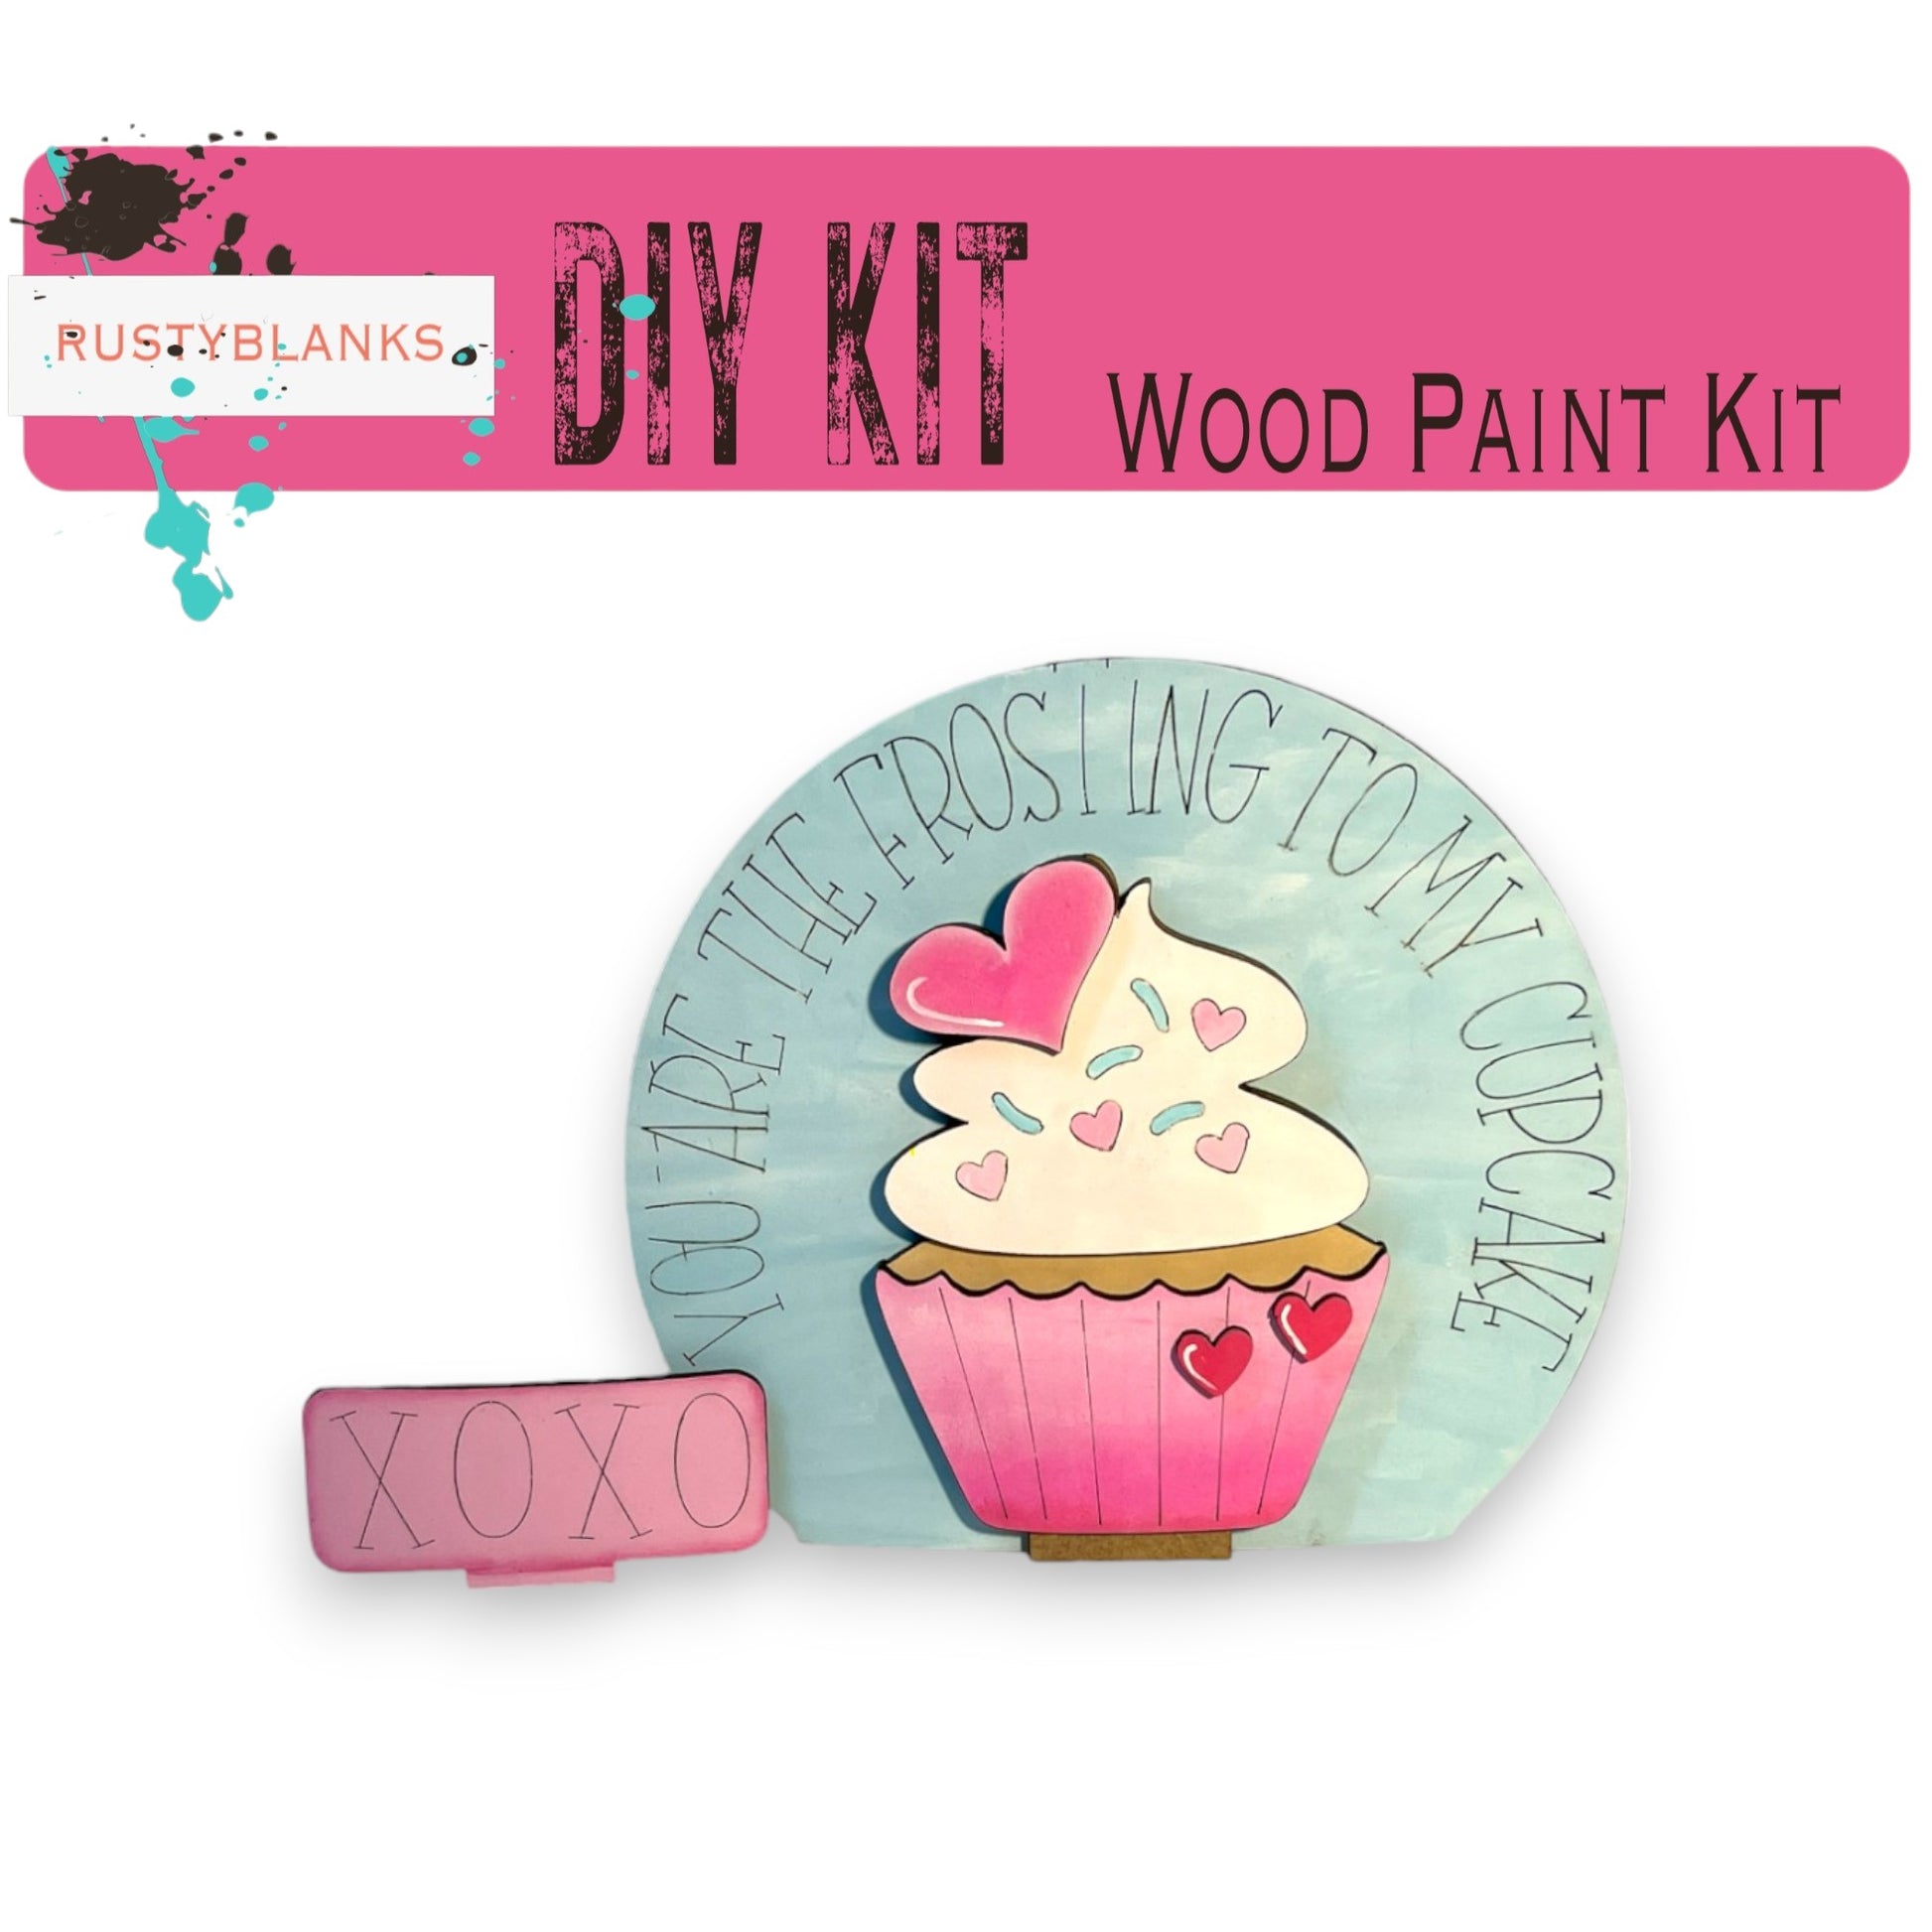 a picture of a wooden paint kit with a cupcake